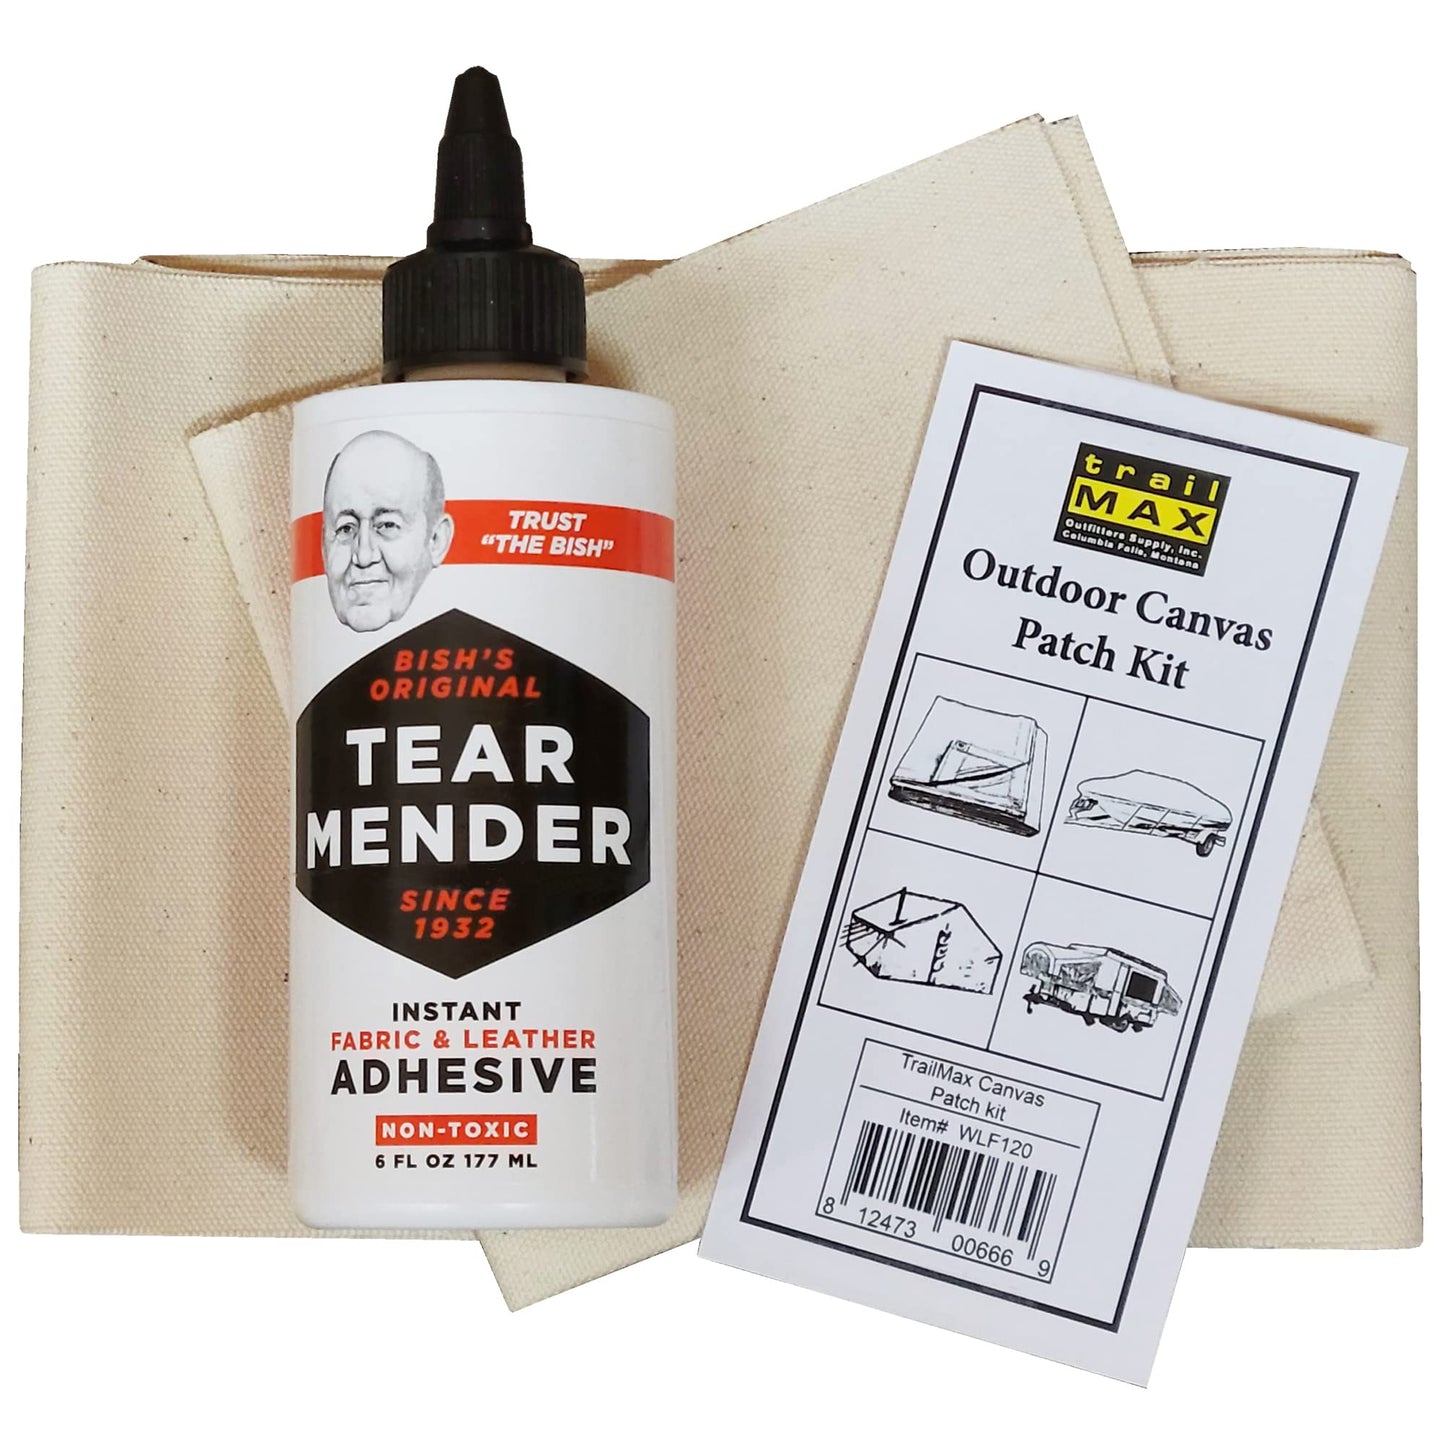 TrailMax Outdoor Canvas Patch Kit to Repair Pop-Up Campers, Canvas Tents, Boat Covers, Tarps